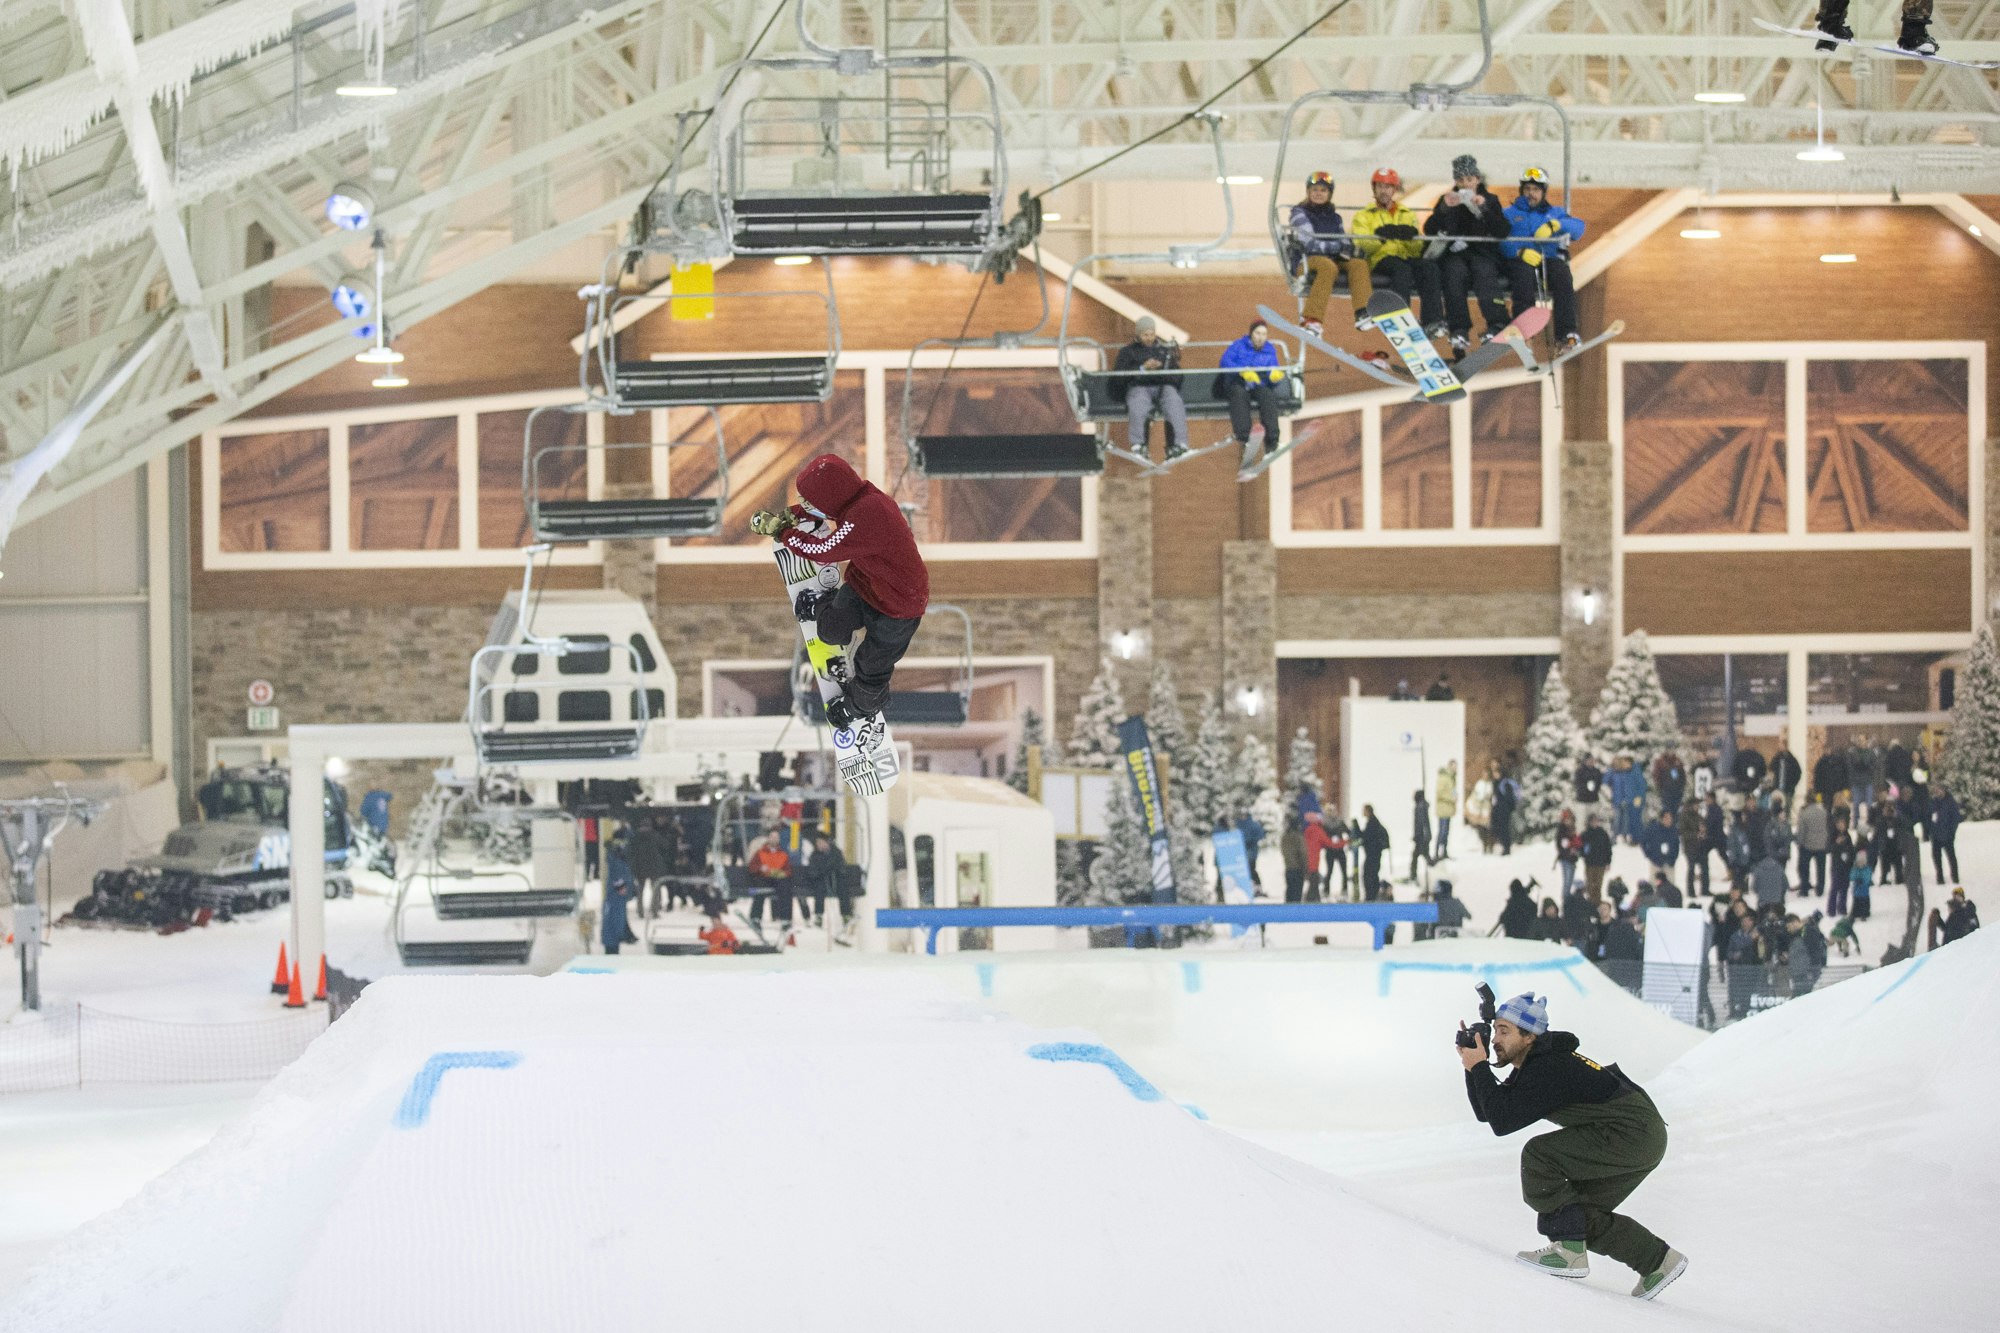 A picture of the slopes at Big SNOW with a snowboarder performing a trick